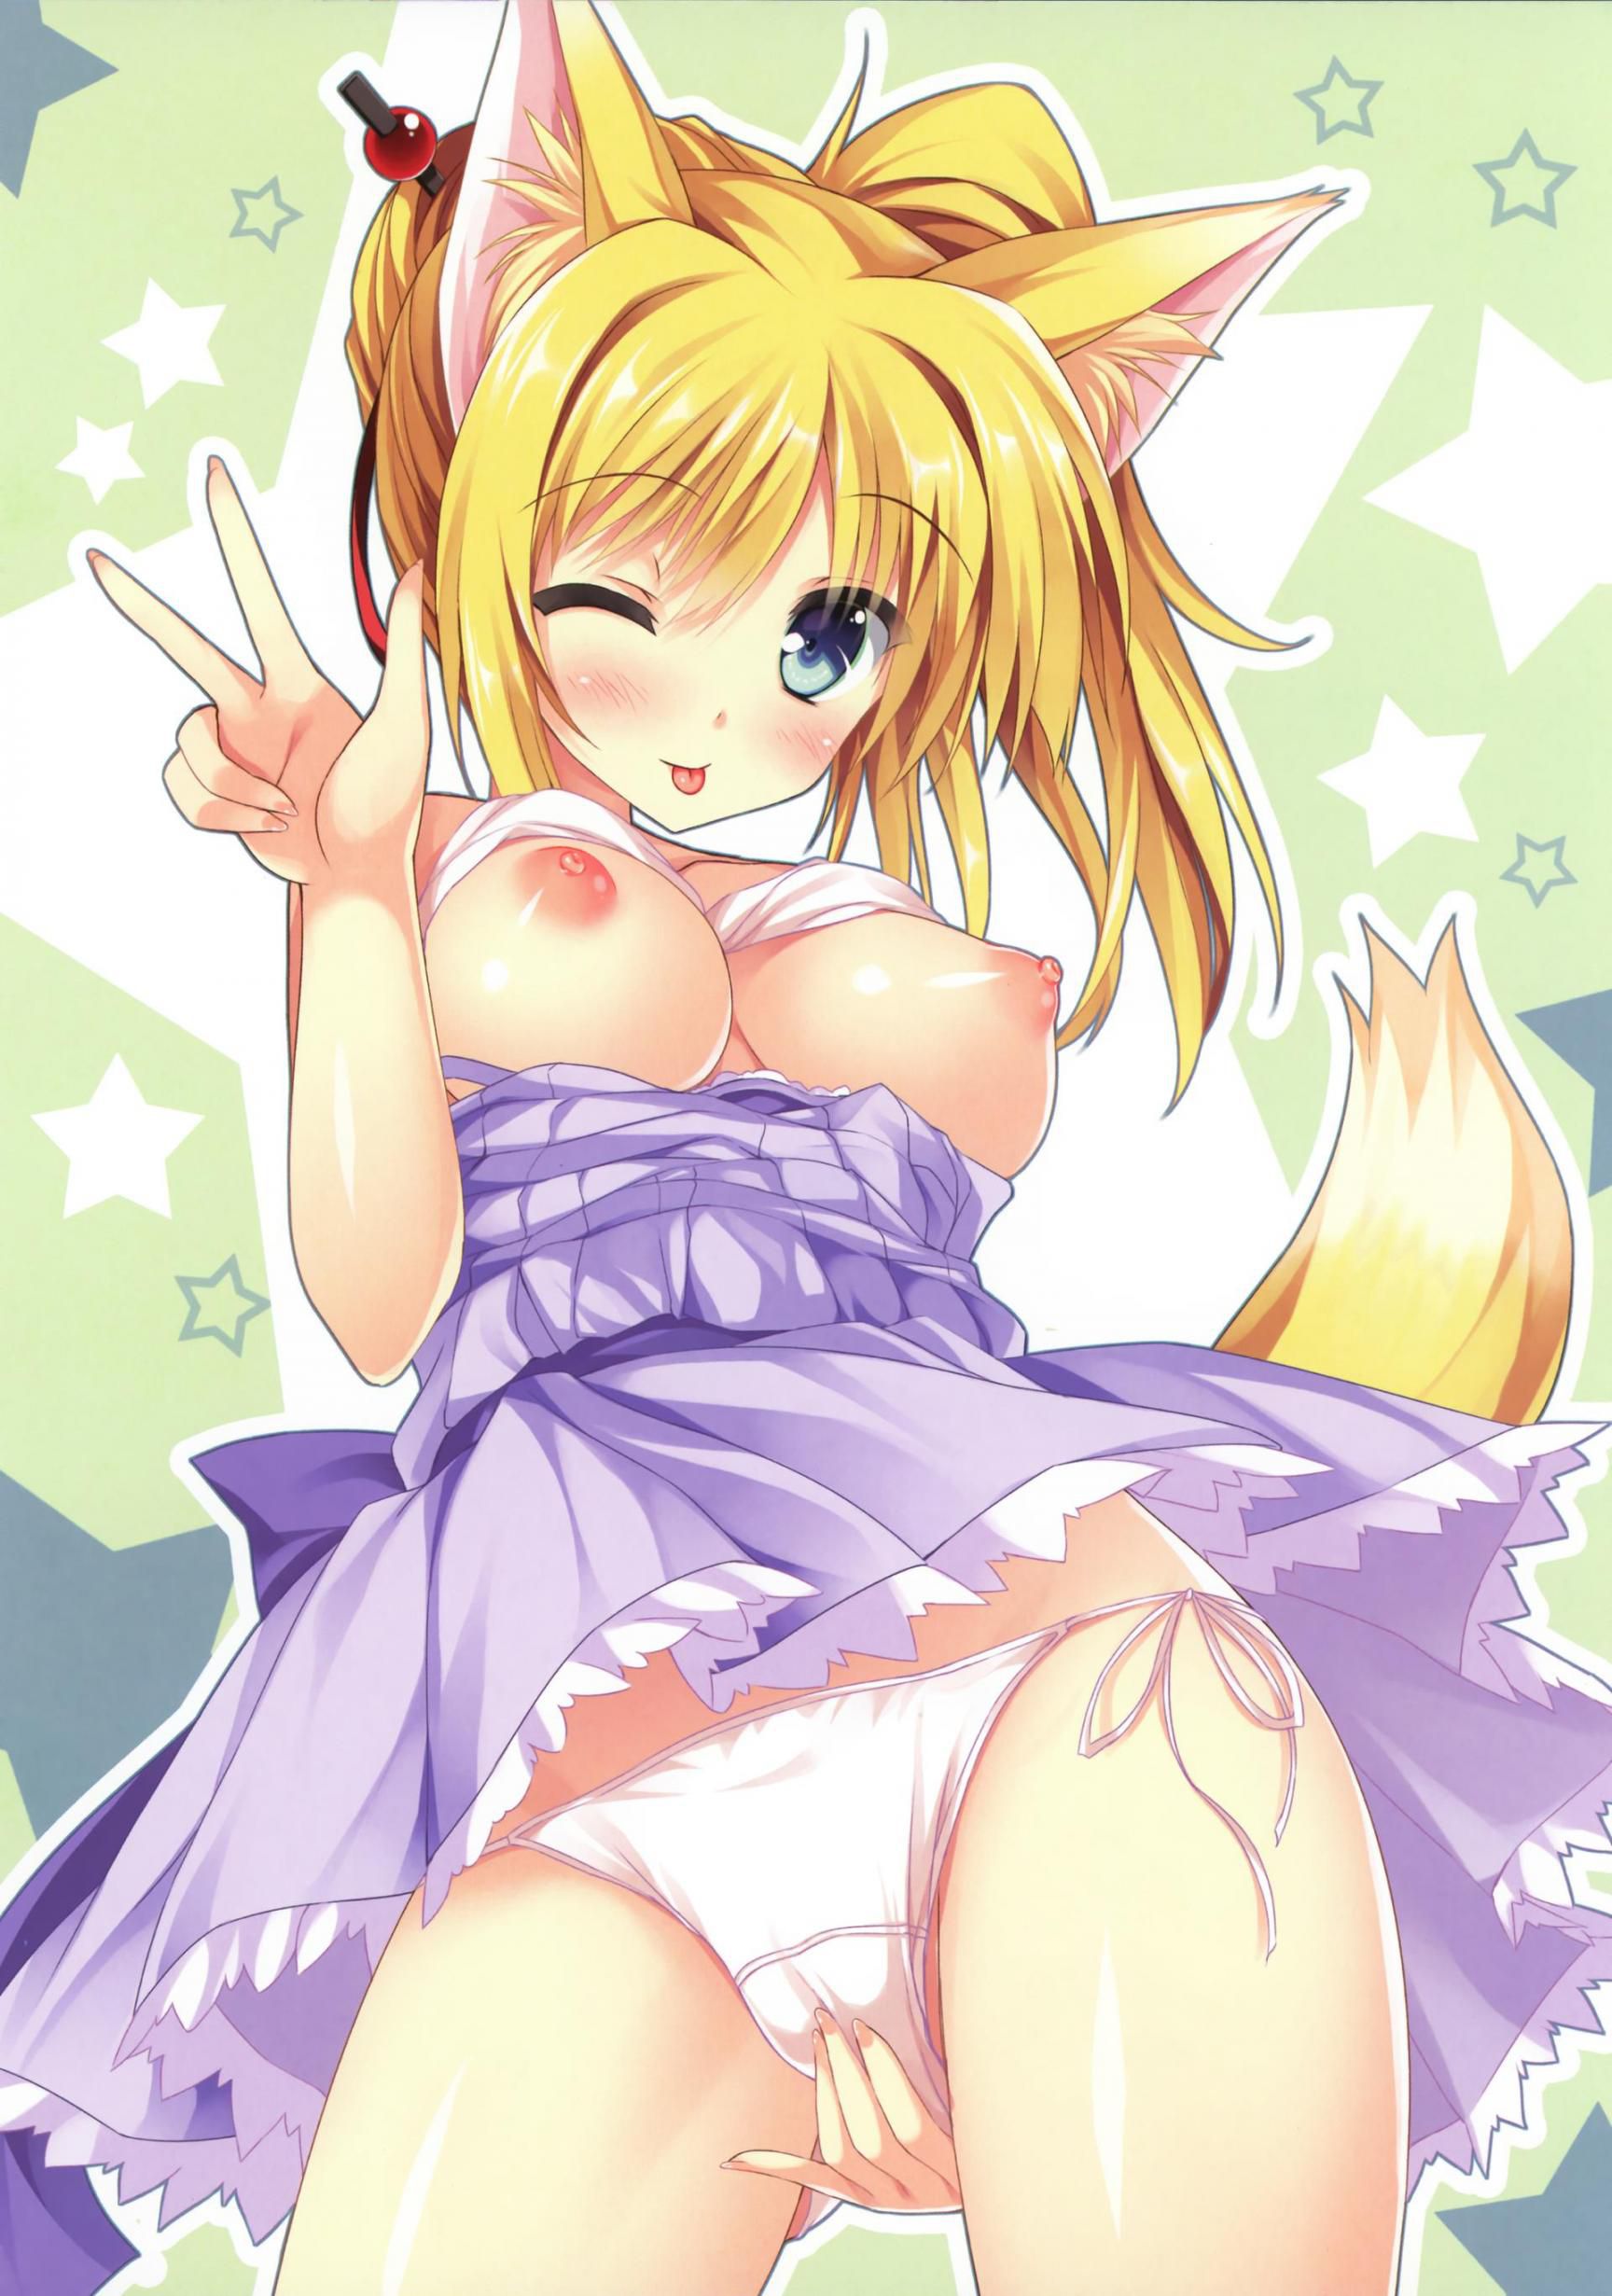 Naughty secondary image of a cute girl with a wink wwww part2 33